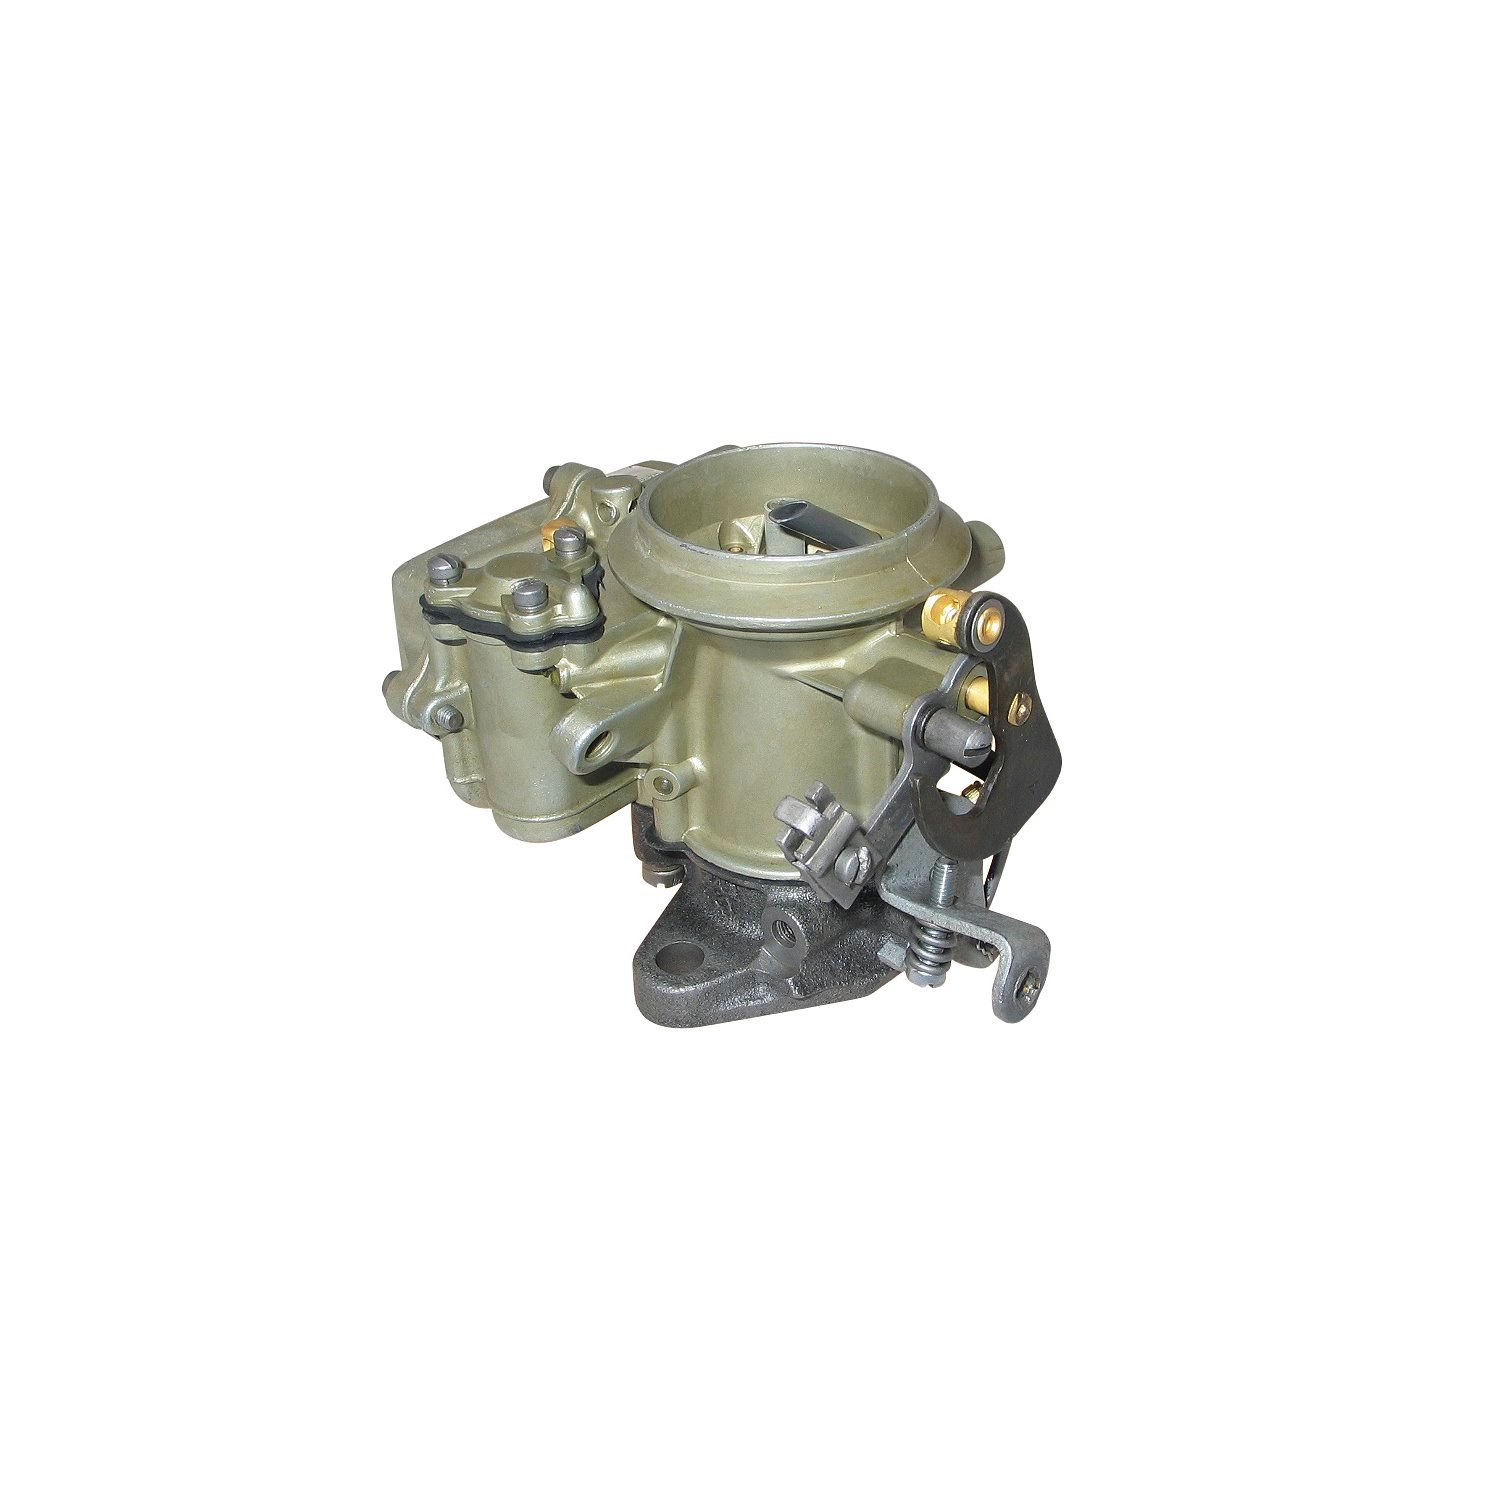 9-906 Holley Remanufactured Carburetor, 1904-Style